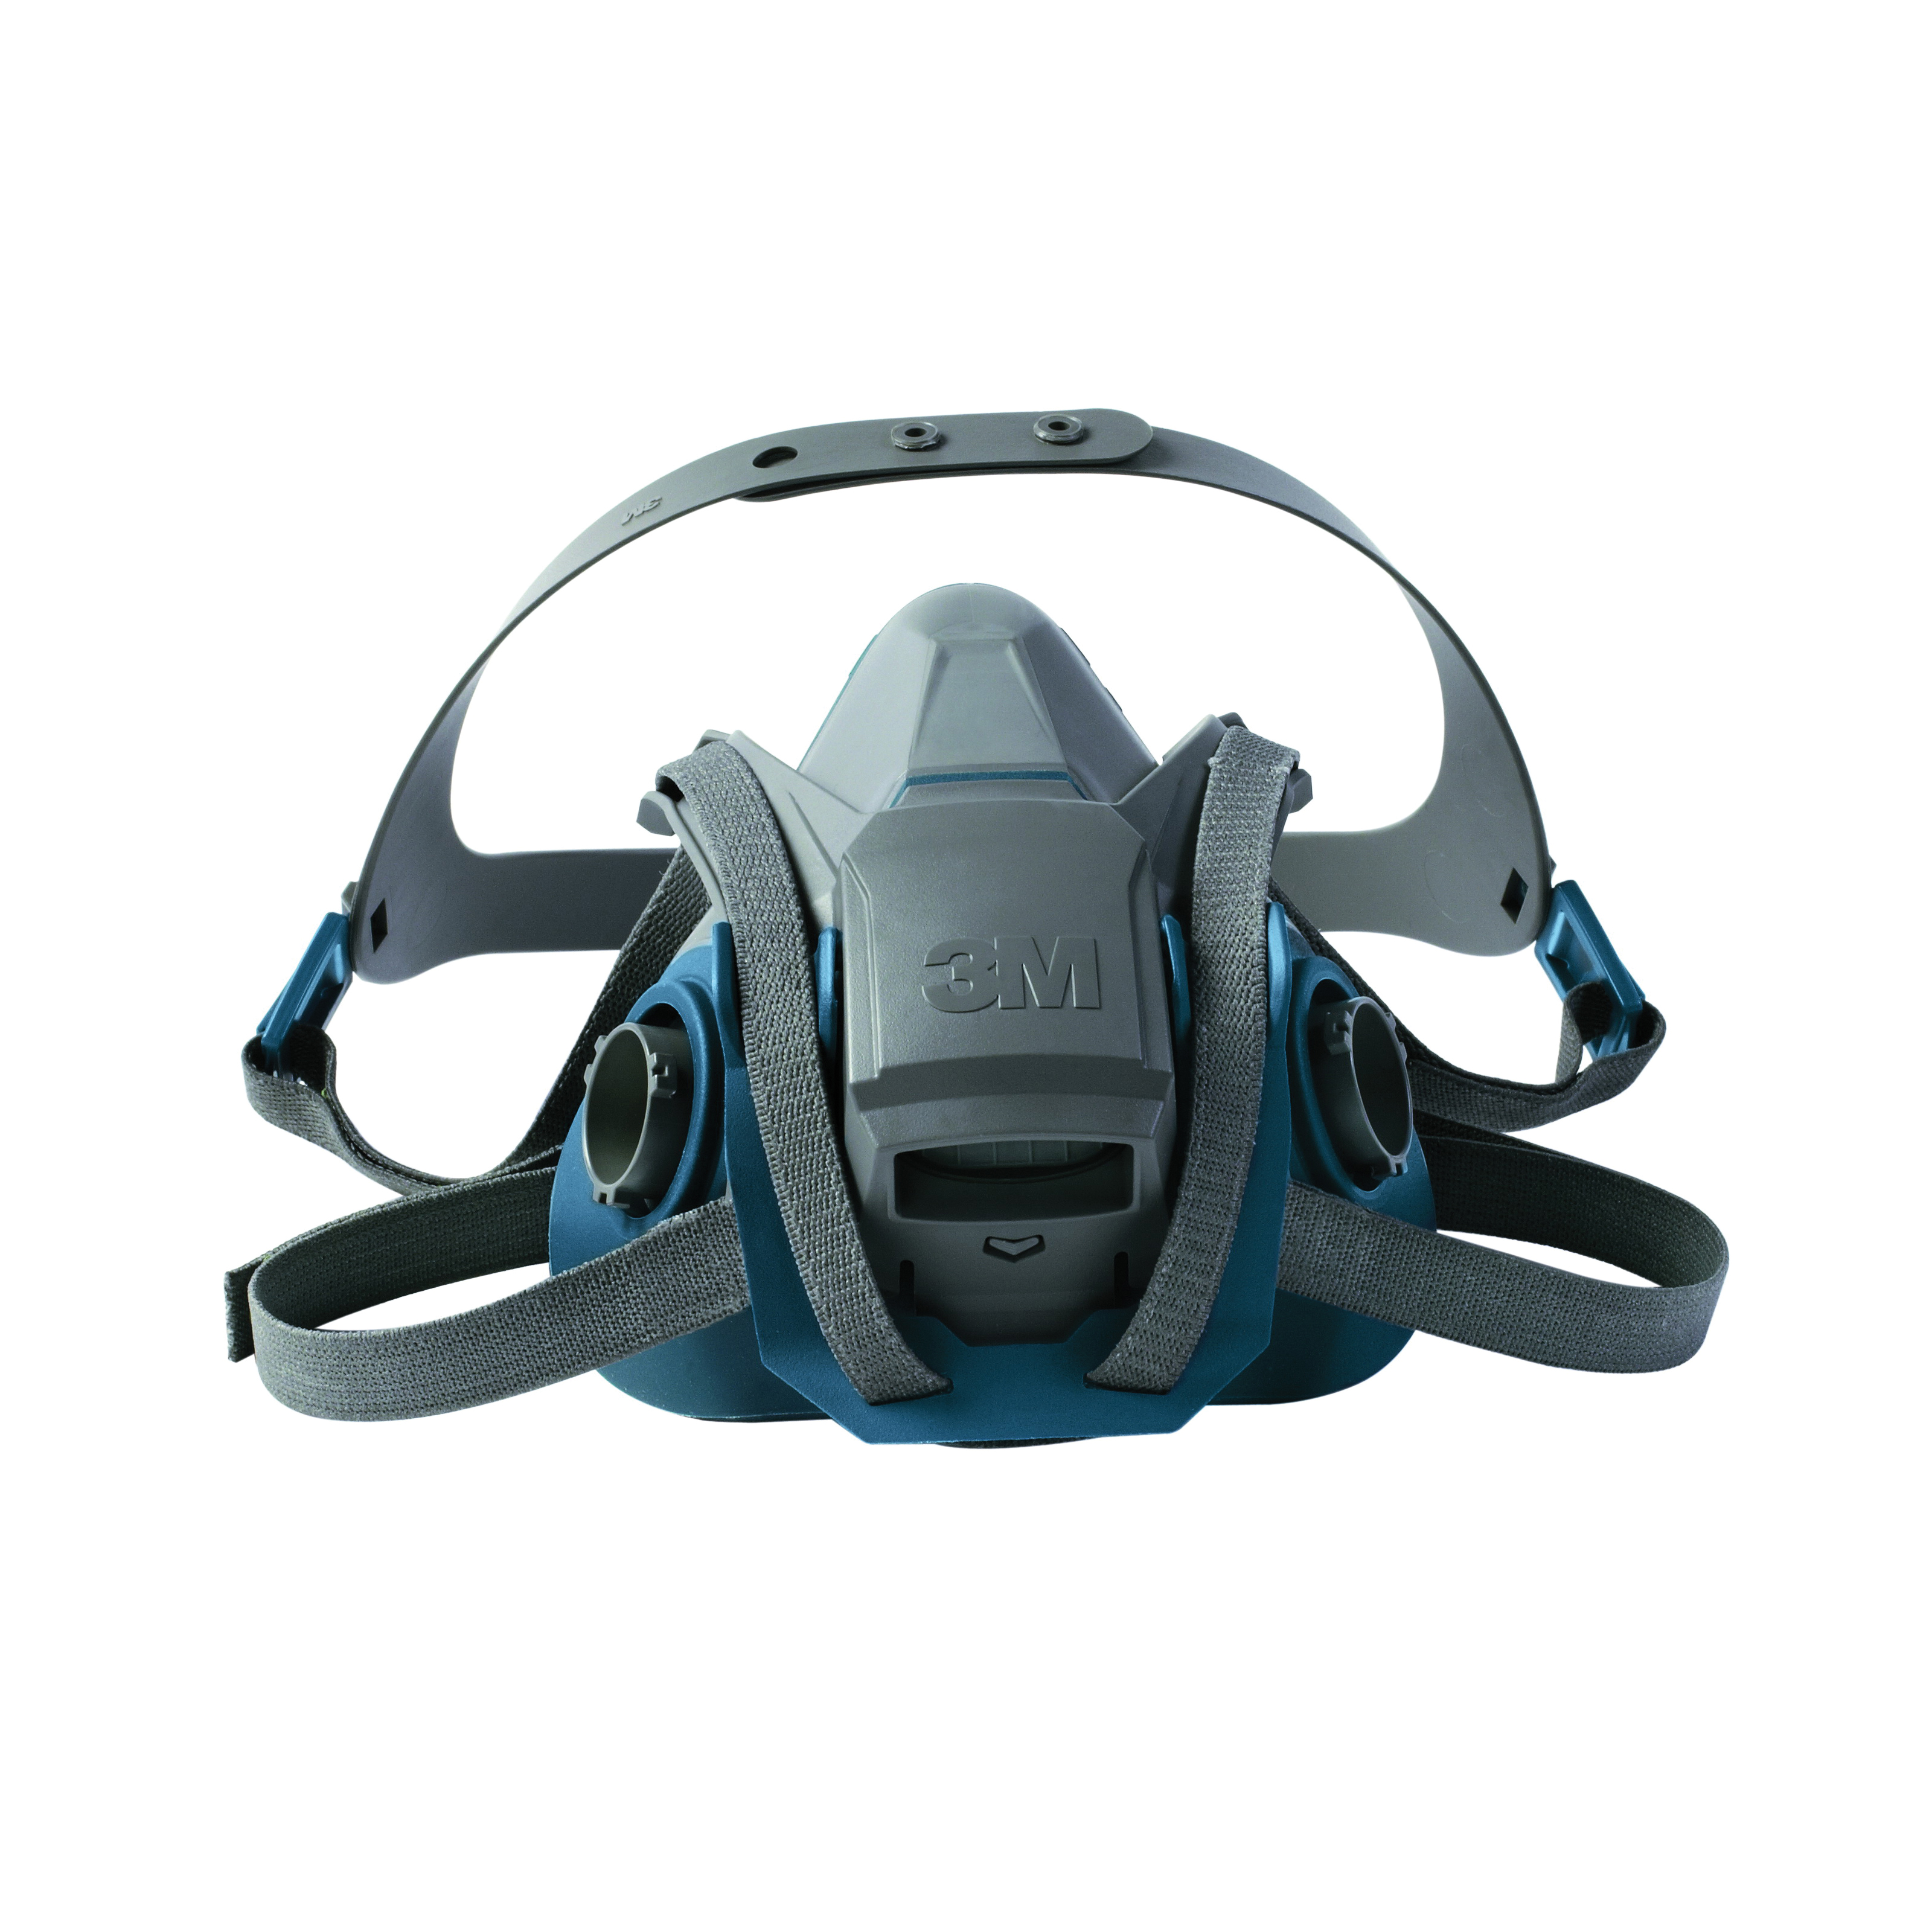 3M™ 051131-49492 6503QL Probed Reusable Half Facepiece Respirator With Cool Flow™ Exhalation Valve, L, 4-Point Quick Latch Suspension, Bayonet Connection, Resists: Gases and Vapors